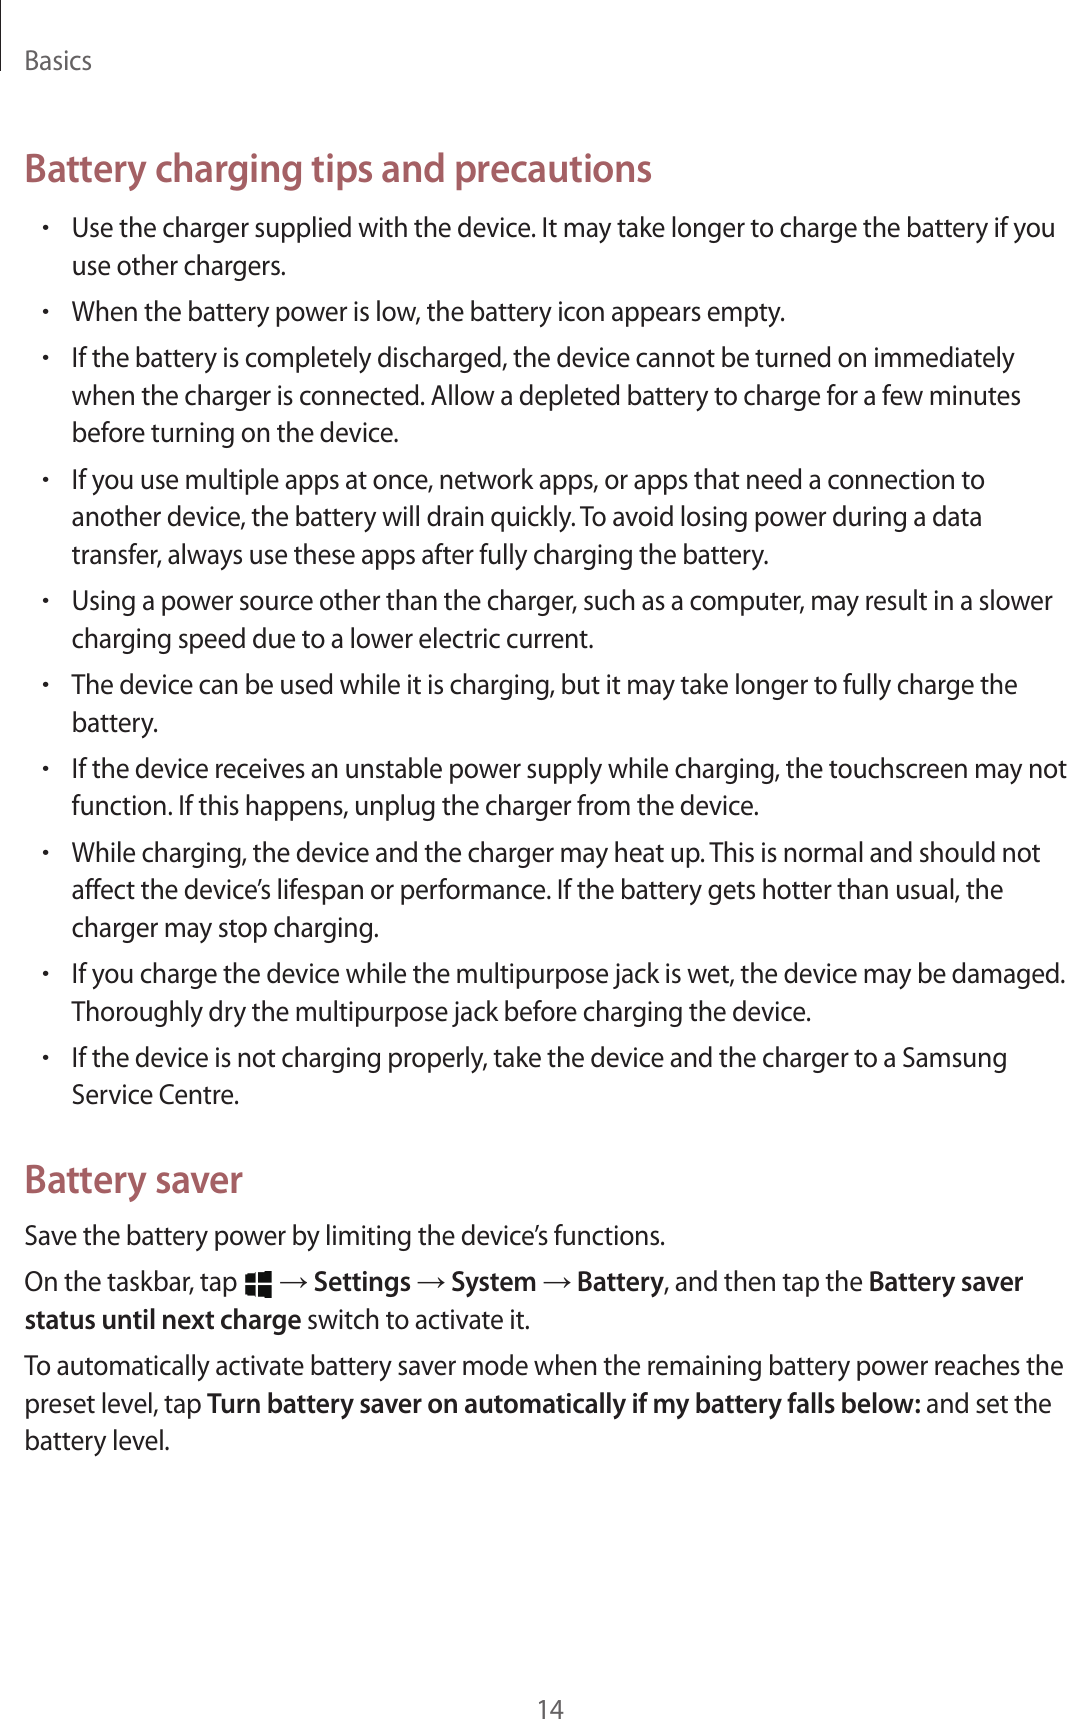 Basics14Battery charging tips and precautions•Use the charger supplied with the device. It may take longer to charge the battery if you use other chargers.•When the battery power is low, the battery icon appears empty.•If the battery is completely discharged, the device cannot be turned on immediately when the charger is connected. Allow a depleted battery to charge for a few minutes before turning on the device.•If you use multiple apps at once, network apps, or apps that need a connection to another device, the battery will drain quickly. To avoid losing power during a data transfer, always use these apps after fully charging the battery.•Using a power source other than the charger, such as a computer, may result in a slower charging speed due to a lower electric current.•The device can be used while it is charging, but it may take longer to fully charge the battery.•If the device receives an unstable power supply while charging, the touchscreen may not function. If this happens, unplug the charger from the device.•While charging, the device and the charger may heat up. This is normal and should not affect the device’s lifespan or performance. If the battery gets hotter than usual, the charger may stop charging.•If you charge the device while the multipurpose jack is wet, the device may be damaged. Thoroughly dry the multipurpose jack before charging the device.•If the device is not charging properly, take the device and the charger to a Samsung Service Centre.Battery saverSave the battery power by limiting the device’s functions.On the taskbar, tap   → Settings → System → Battery, and then tap the Battery saver status until next charge switch to activate it.To automatically activate battery saver mode when the remaining battery power reaches the preset level, tap Turn battery saver on automatically if my battery falls below: and set the battery level.